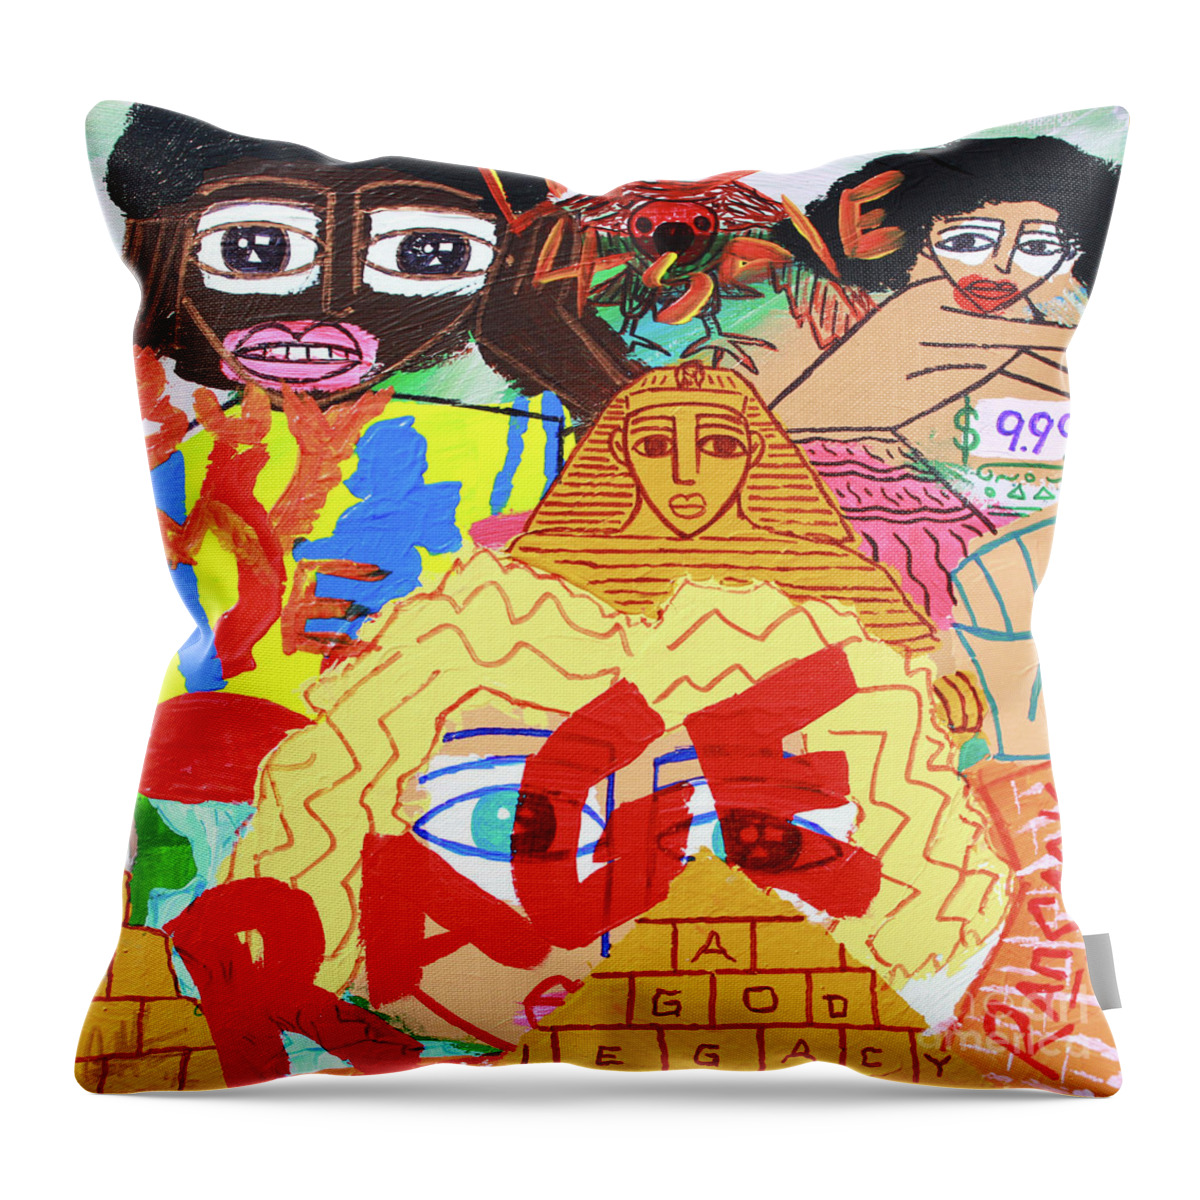  Throw Pillow featuring the painting Culture Vultures by Odalo Wasikhongo